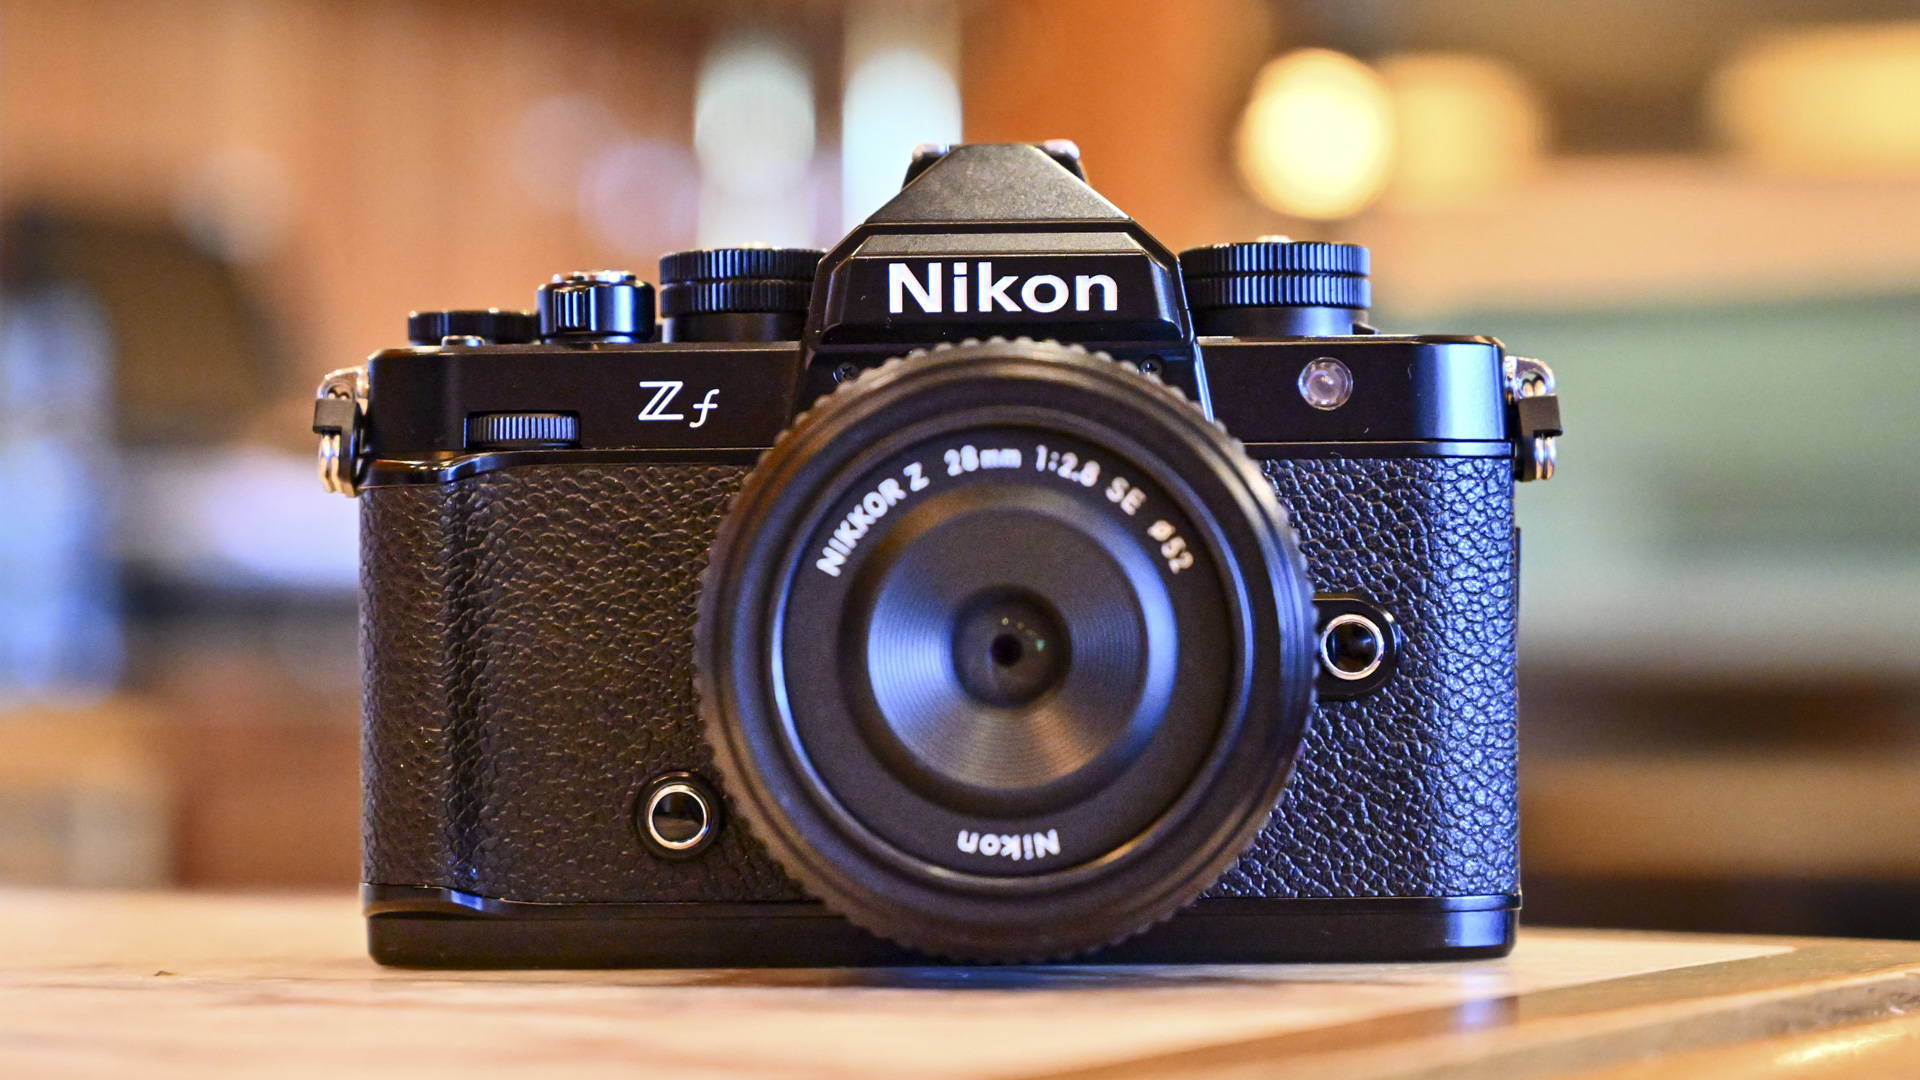 Nikon Zf camera front with Z 28mm F2.8 SE lens attached